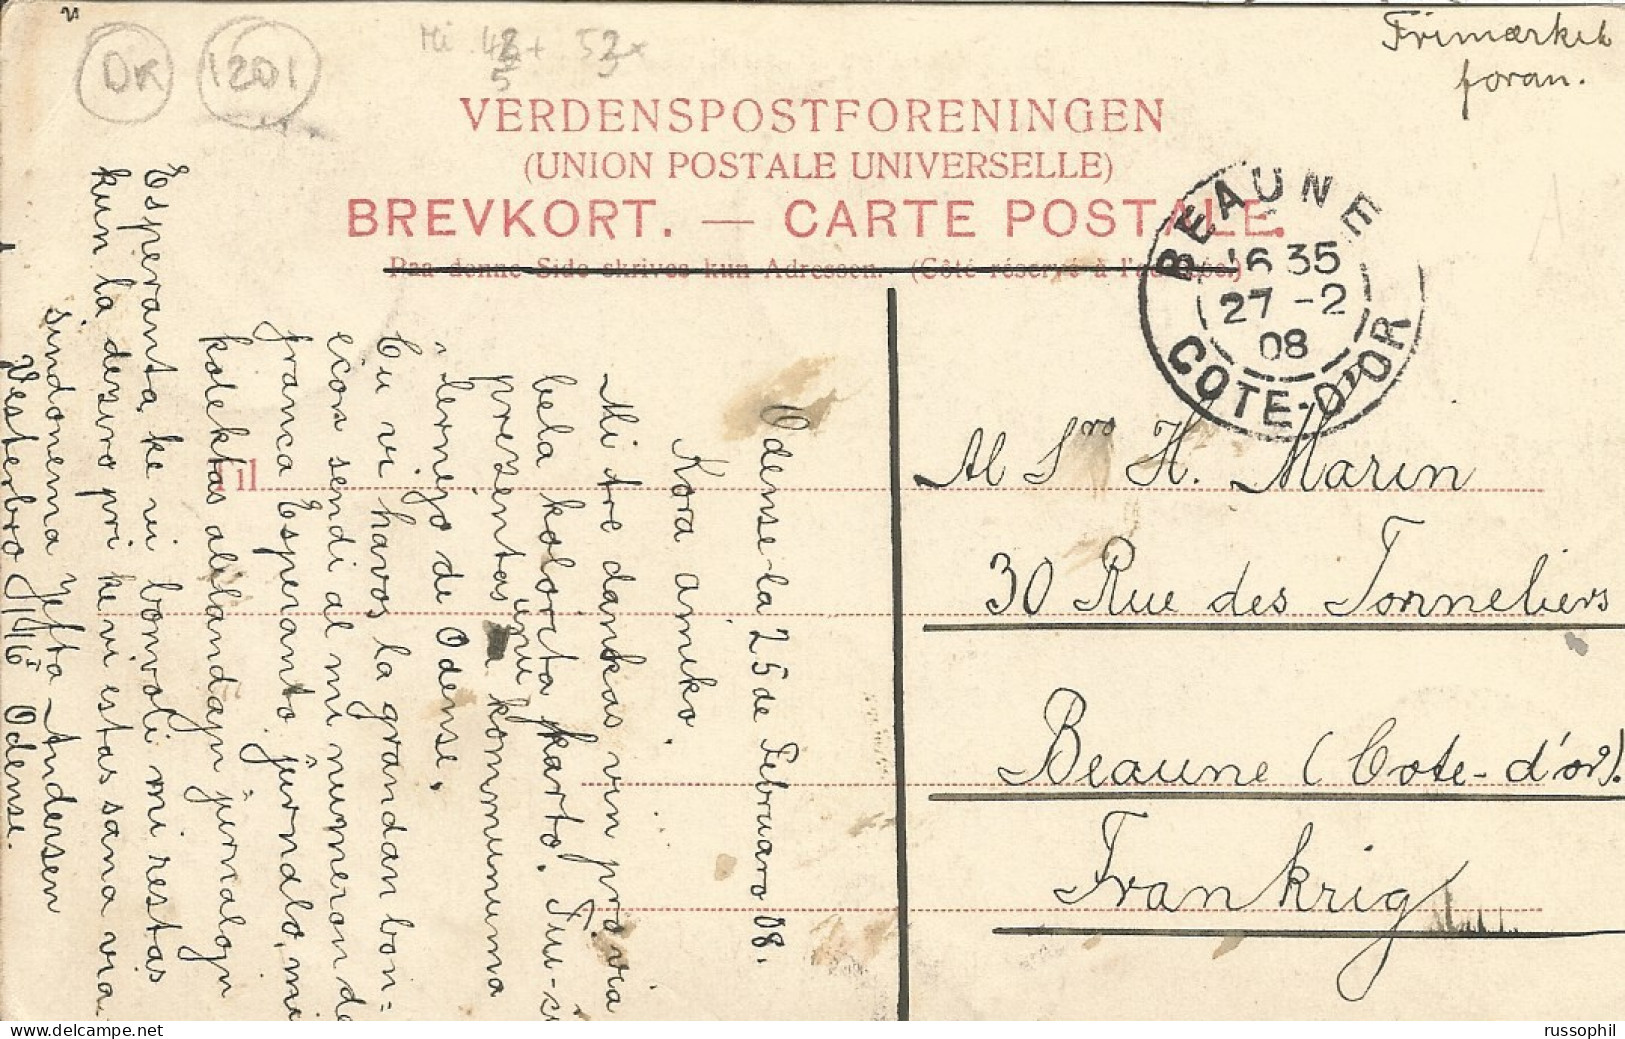 DENMARK - SPECTACULAR 6 STAMP FRANKING (10 ORE) ON PC (VIEW OF ODENSEE) TO FRANCE - 1908 - Lettres & Documents